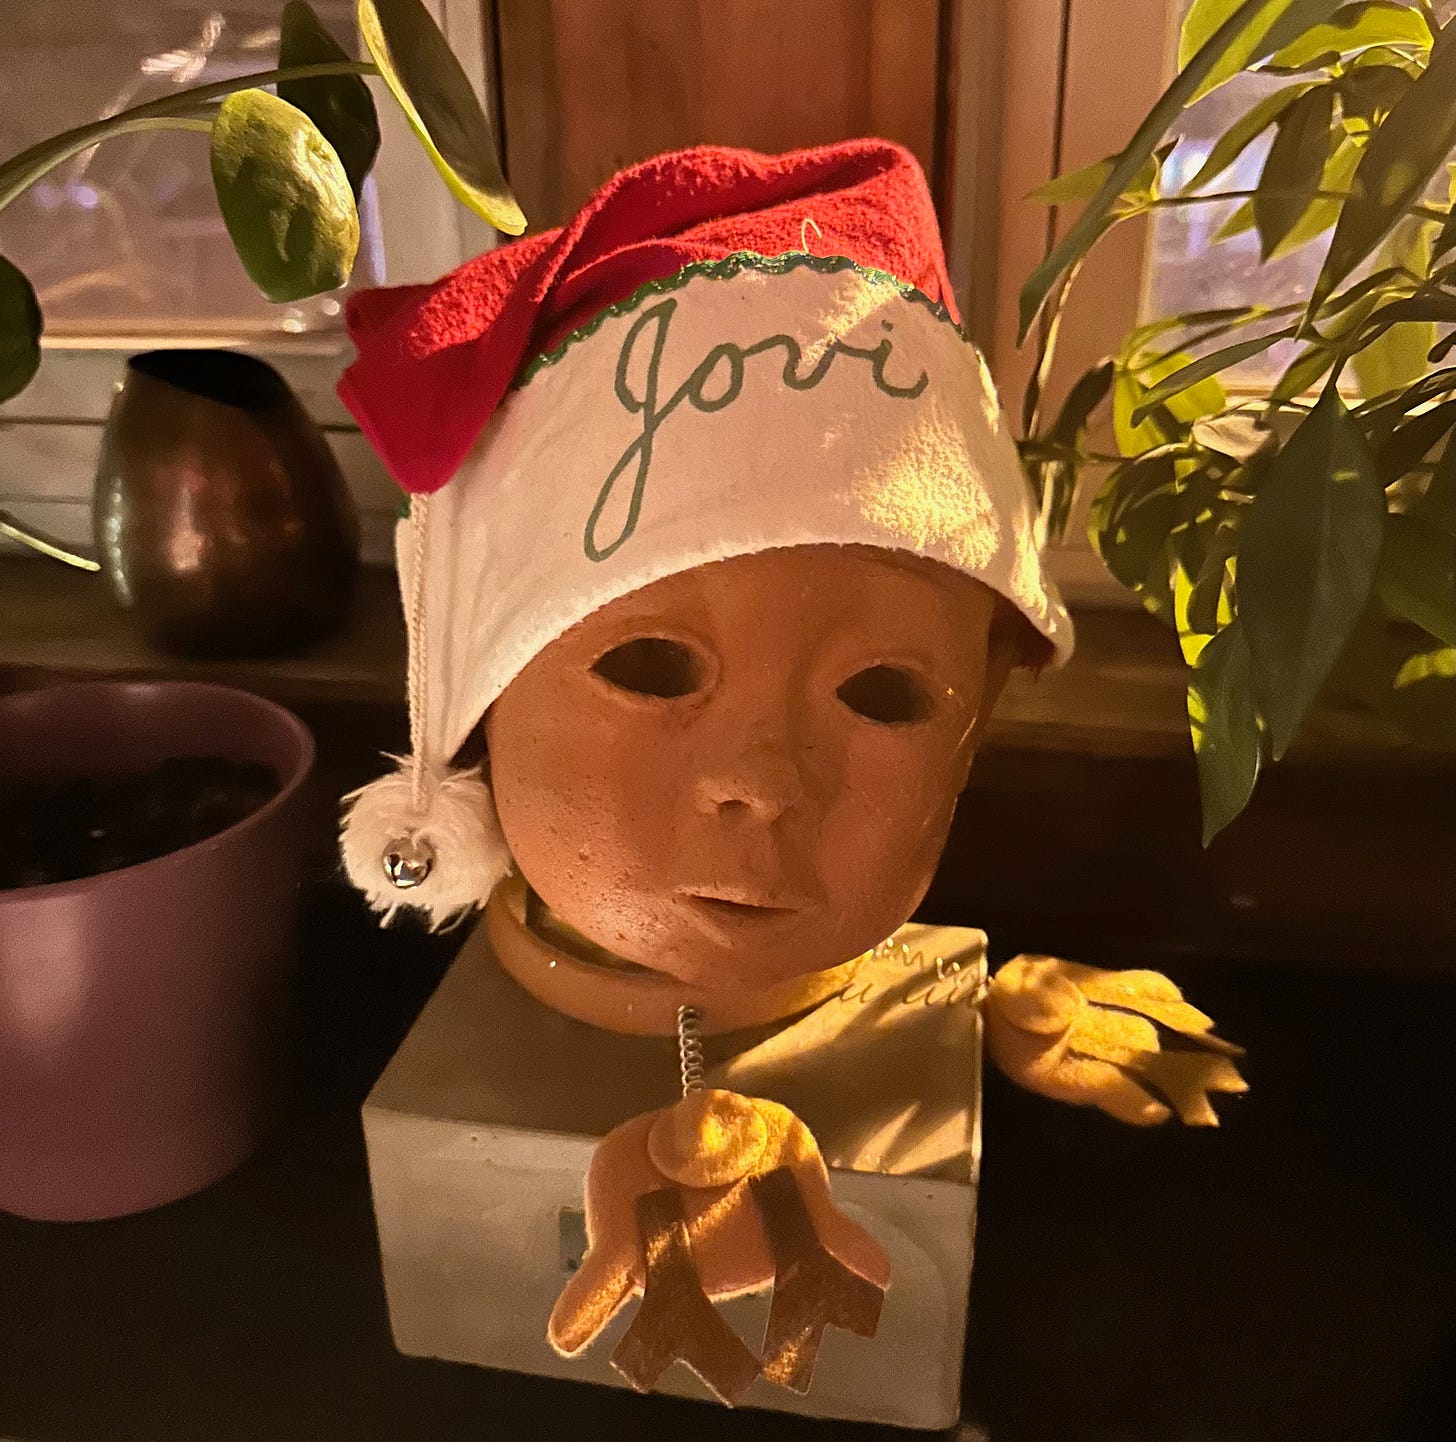 Jowi baby head clay bust with Santa hat saying "Jovi"